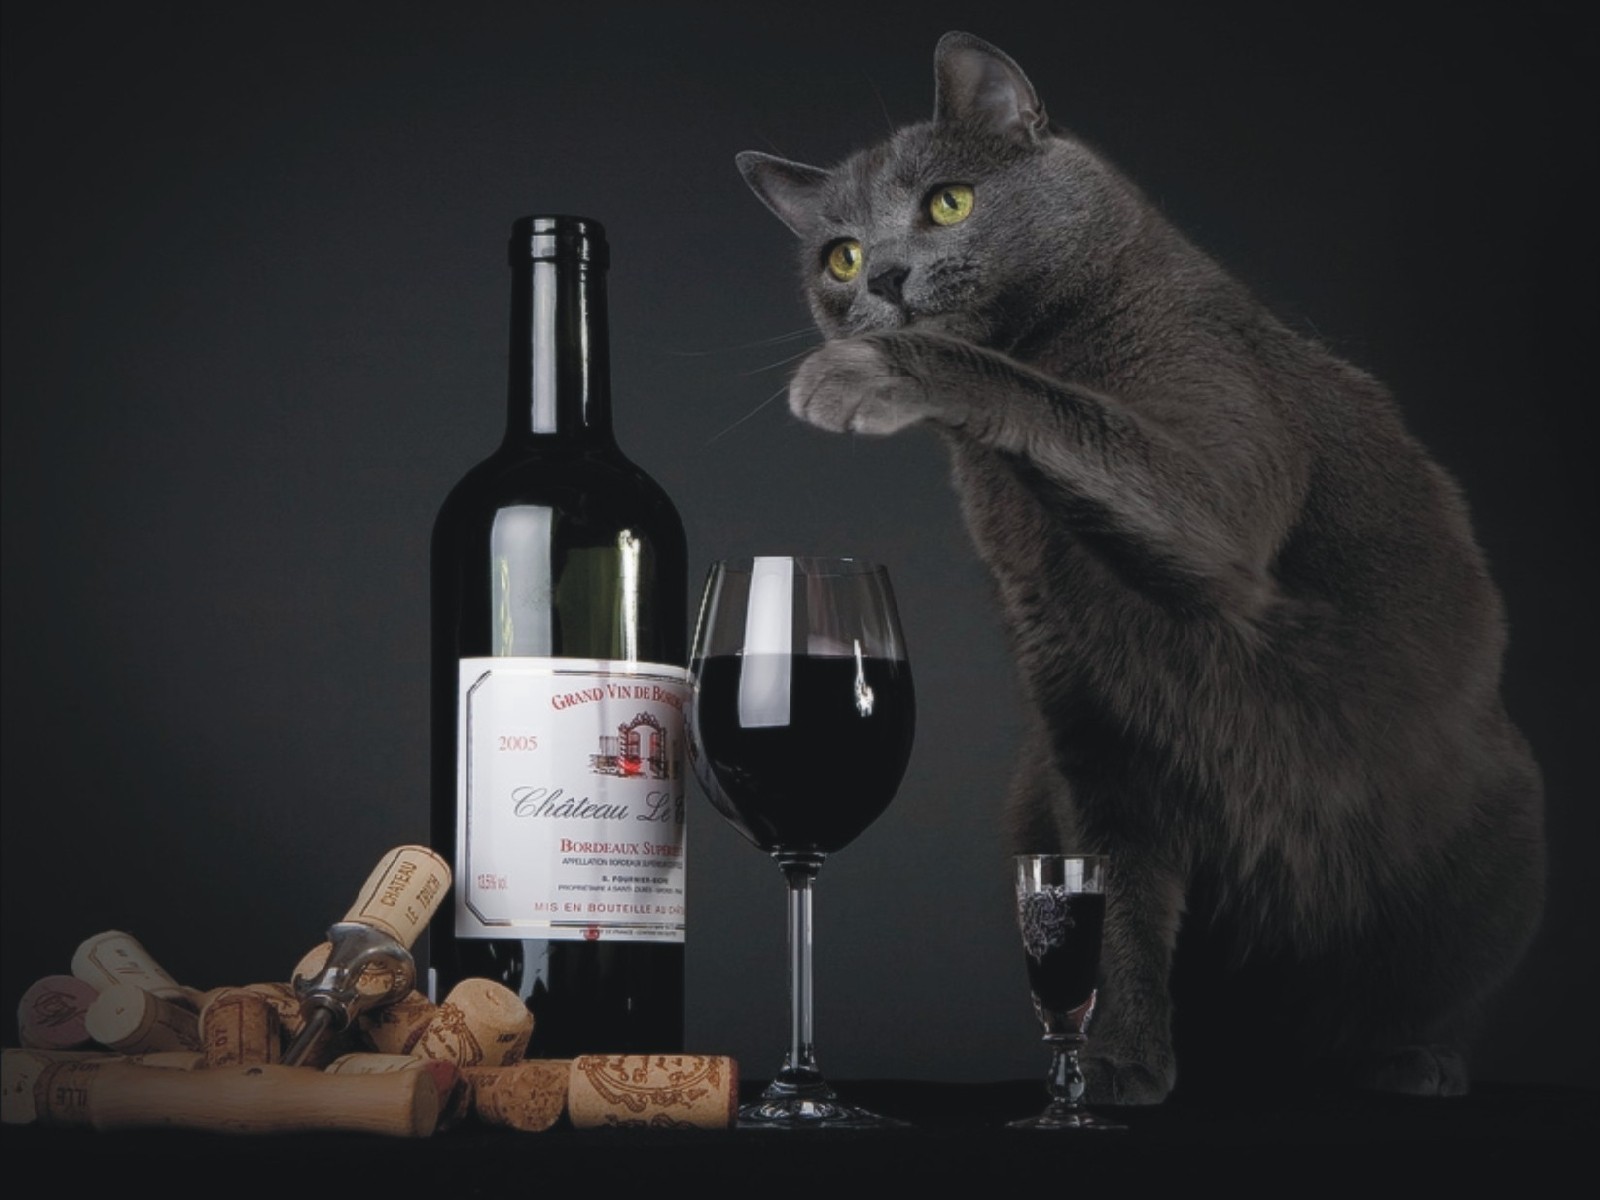   wine,  and gray cat,wallpapers for desktop